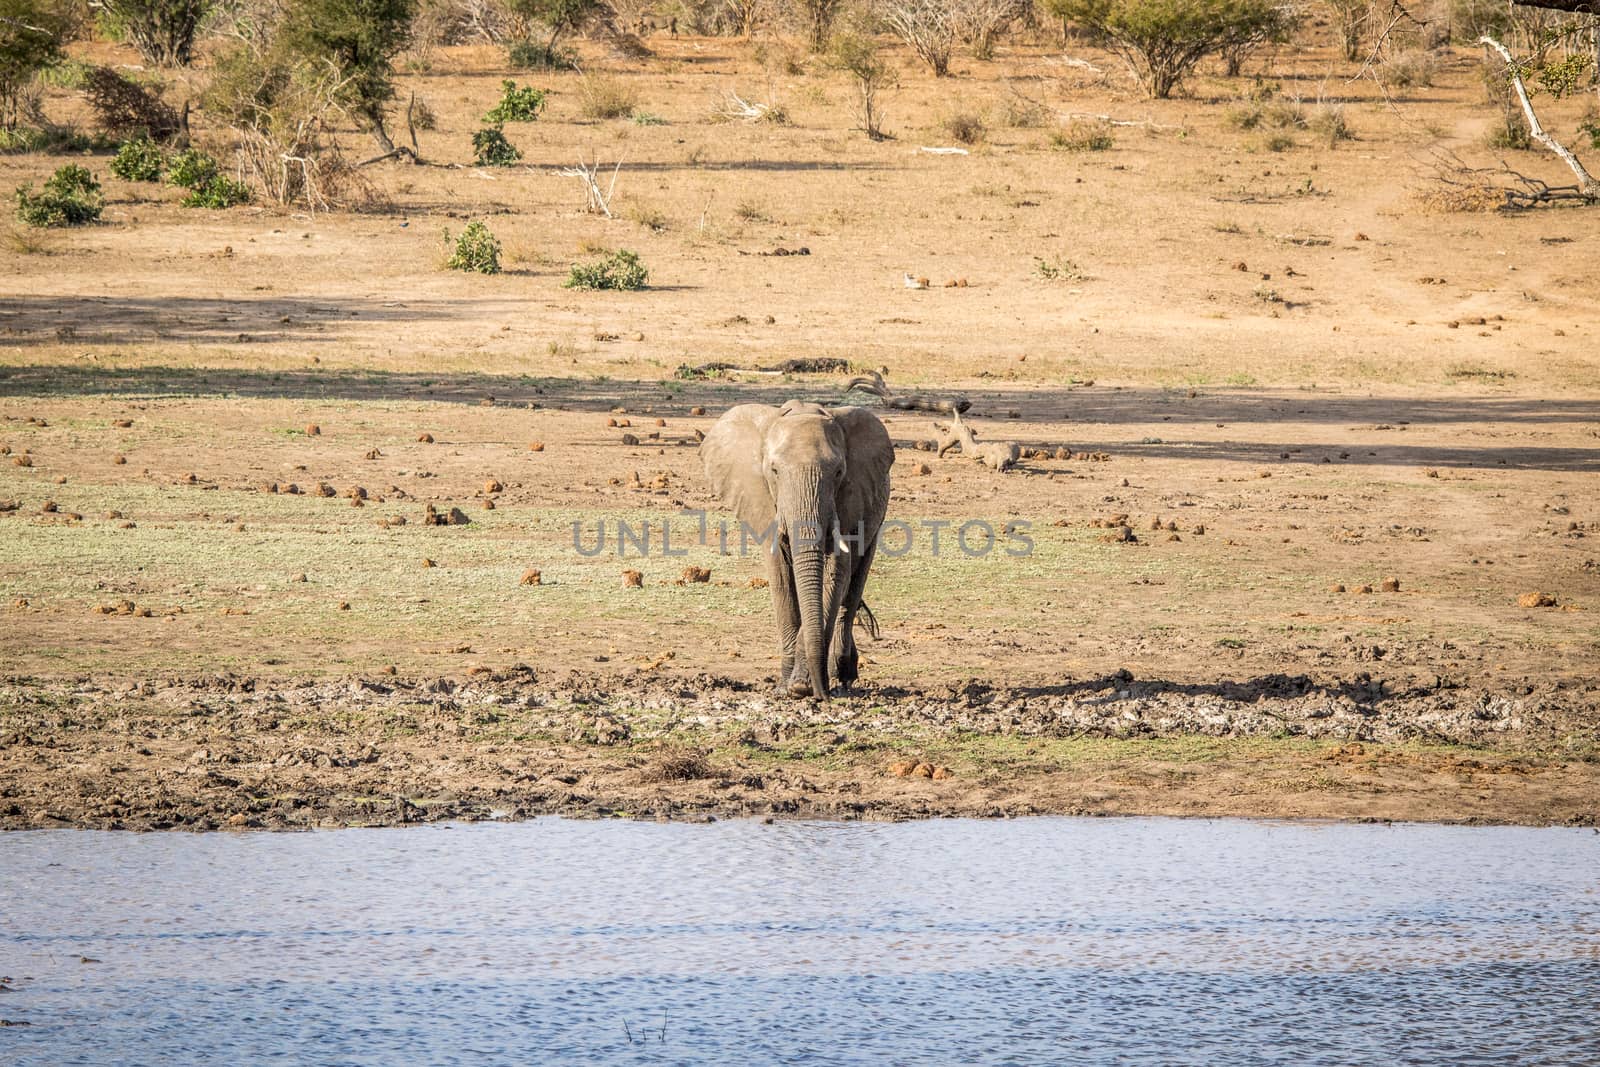 Elephant walking towards the water in the Kruger National Park, South Africa.